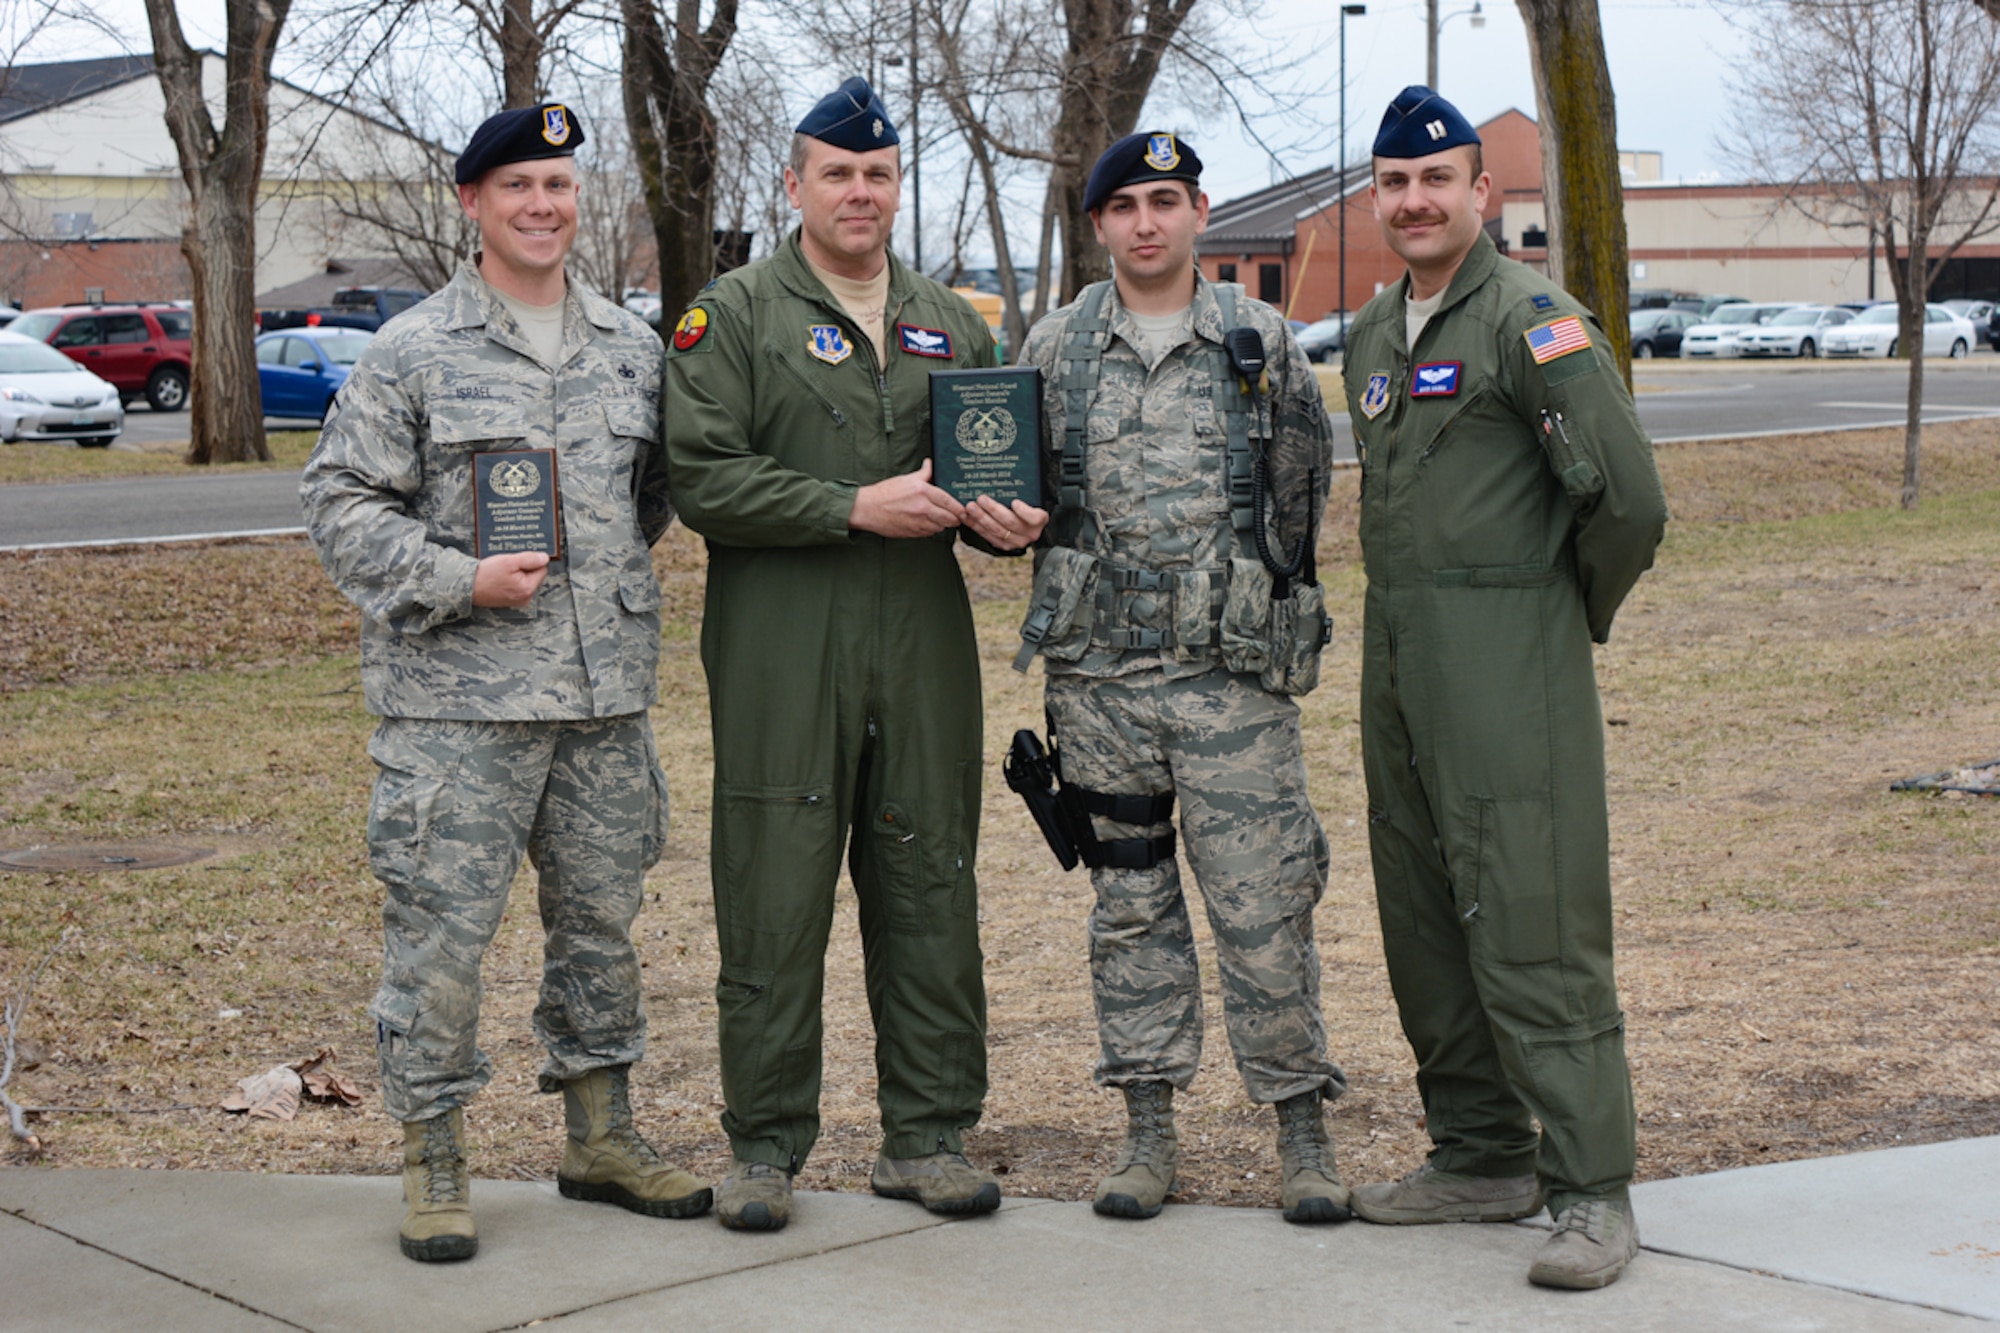 (From left) Master Sgt. Ben Israel, 139th Security Forces Squadron, Lt. Col. Ron Douglas, 180th Airlift Squadron, Airman 1st Class Williams, 139th Security Forces Squadron, and Capt. Mark Hanna, 180th Airlift Squadron pose for a photo at Rosecrans Air National Guard Base, Mo., March 27, 2014. This was one of three teams from the 139th Airlift Wing that competed in the Missouri National Guard Adjutant General’s Combat Tournament. (U.S. Air National Guard photo by Tech. Sgt. Michael Crane/Released)